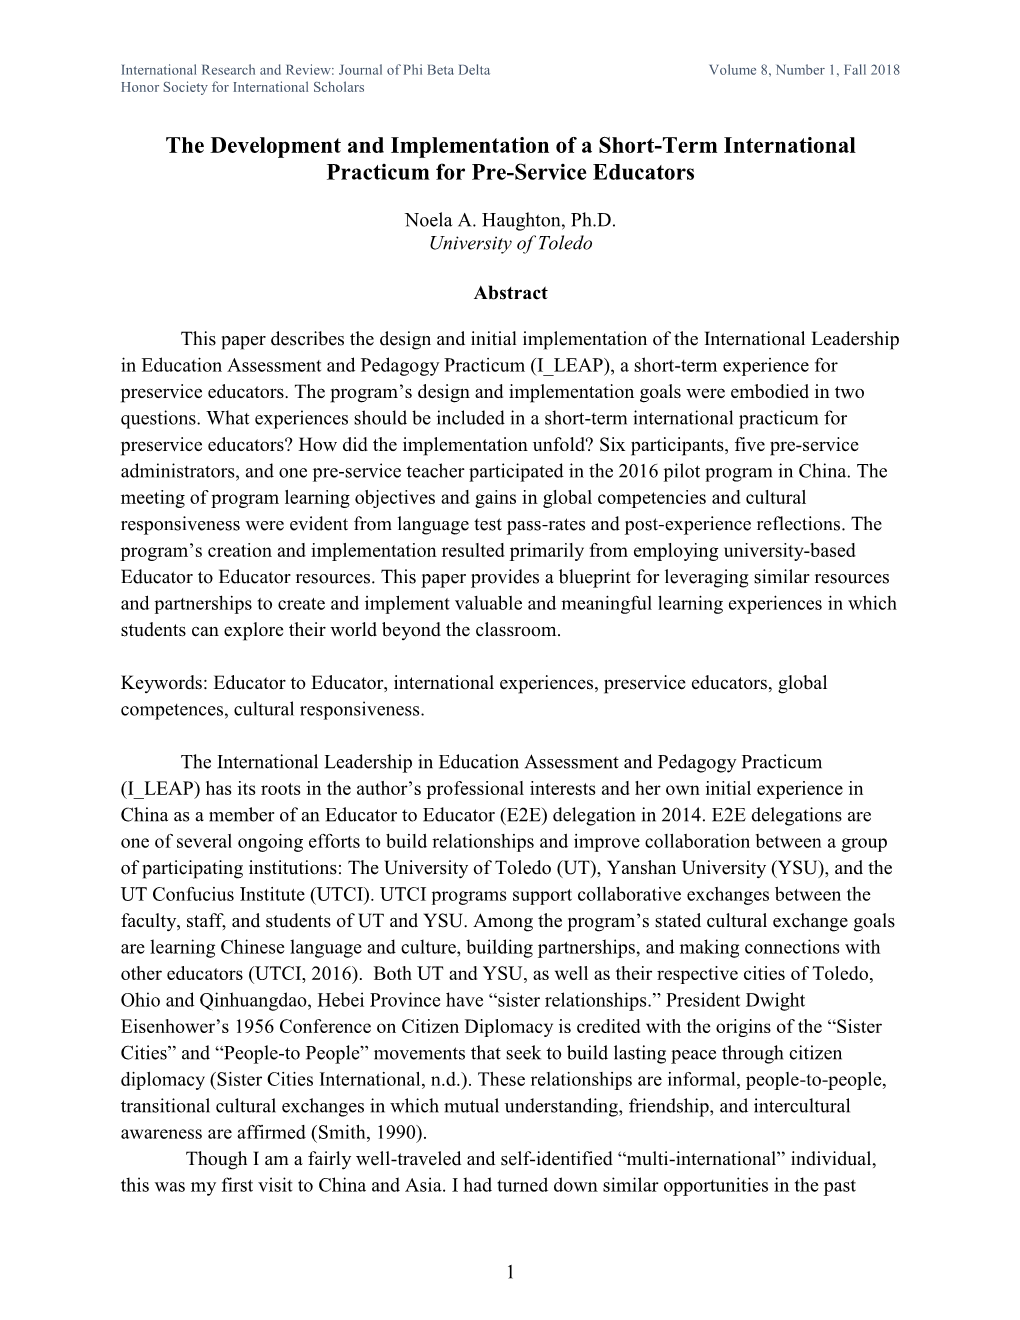 The Development and Implementation of a Short-Term International Practicum for Pre-Service Educators